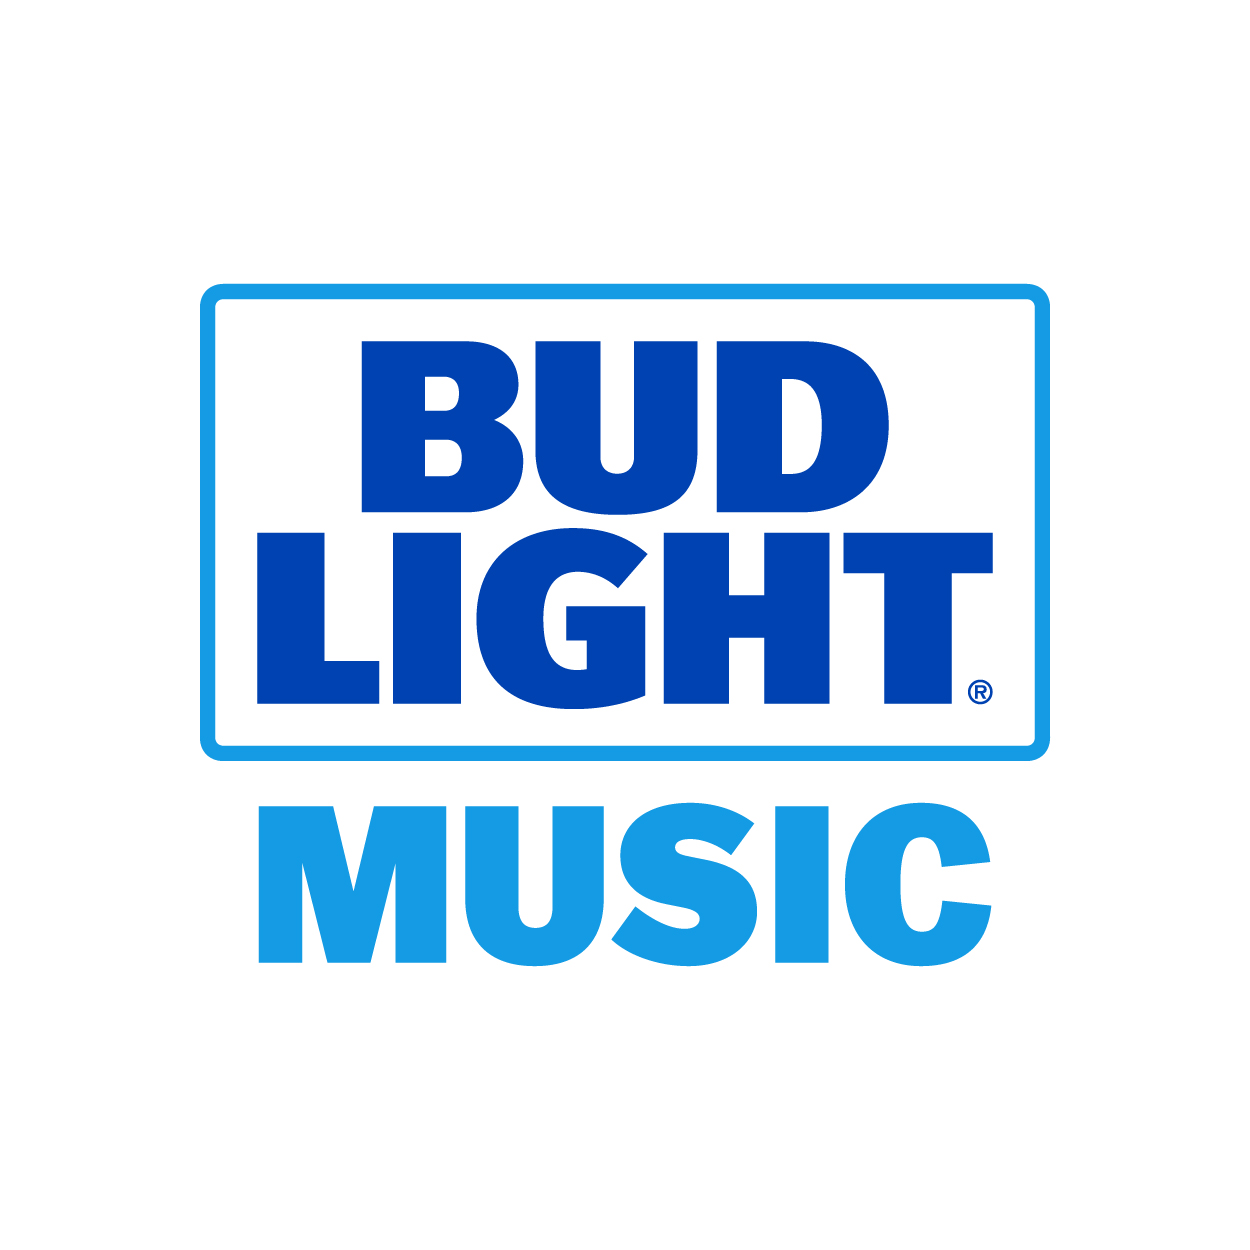 Bud Light Ups the Ante Bringing Their Latest Collaborative Stage Moment